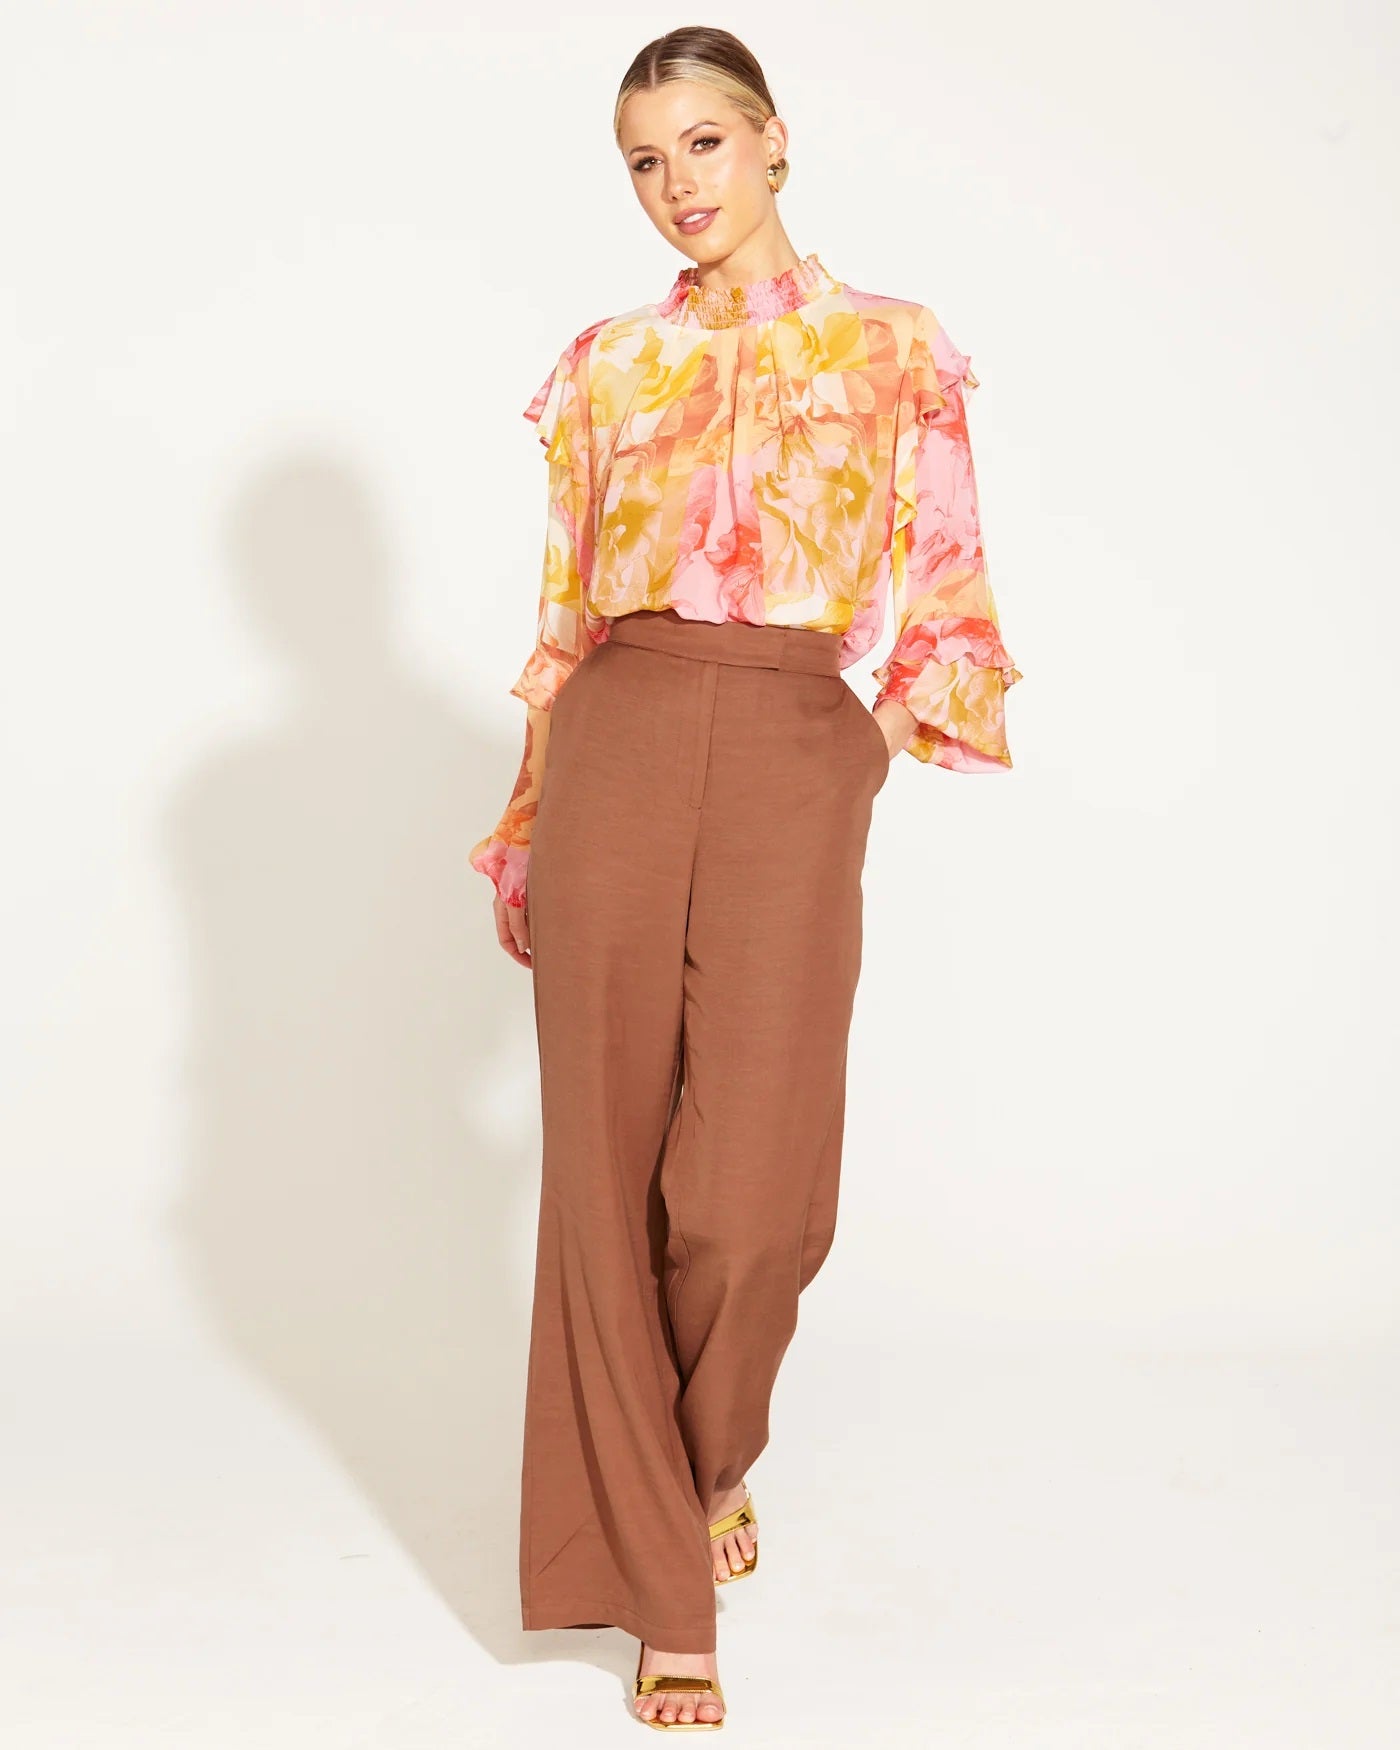 Fate + Becker Earthly Paradise Blouse